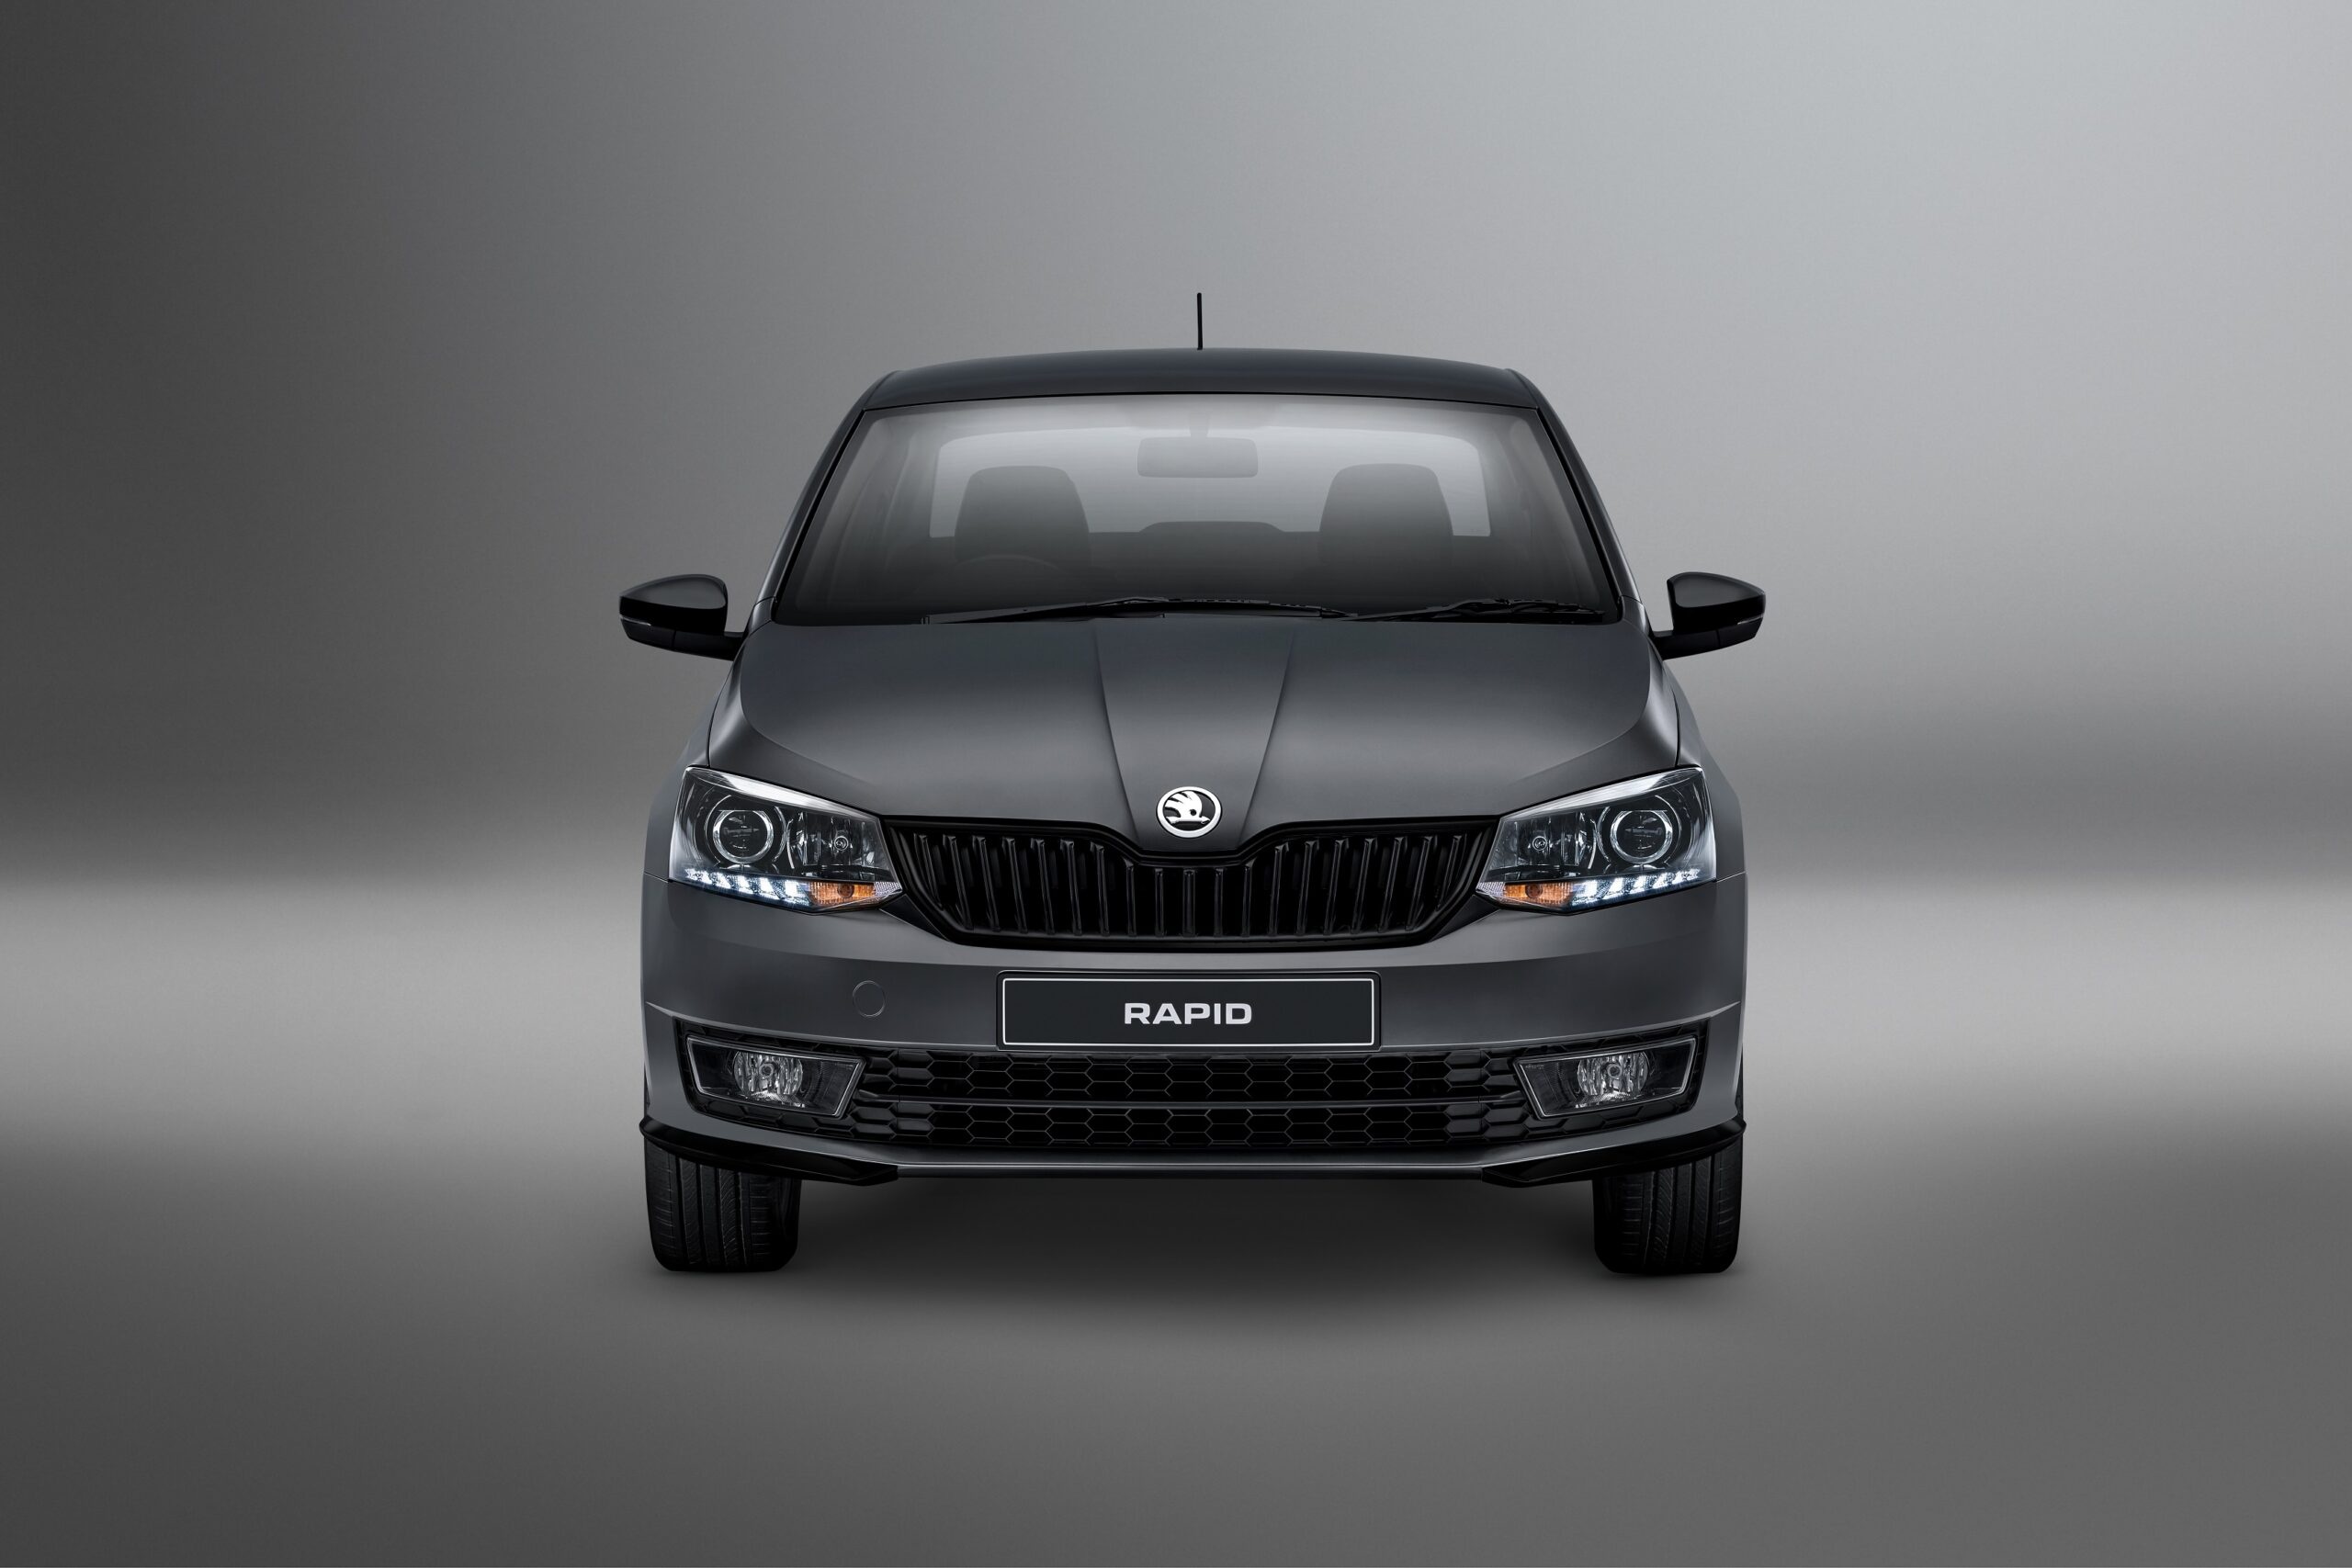 Skoda Rapid, Matte edition, Manual and automatic options, Thrilling driving experience, 2560x1710 HD Desktop